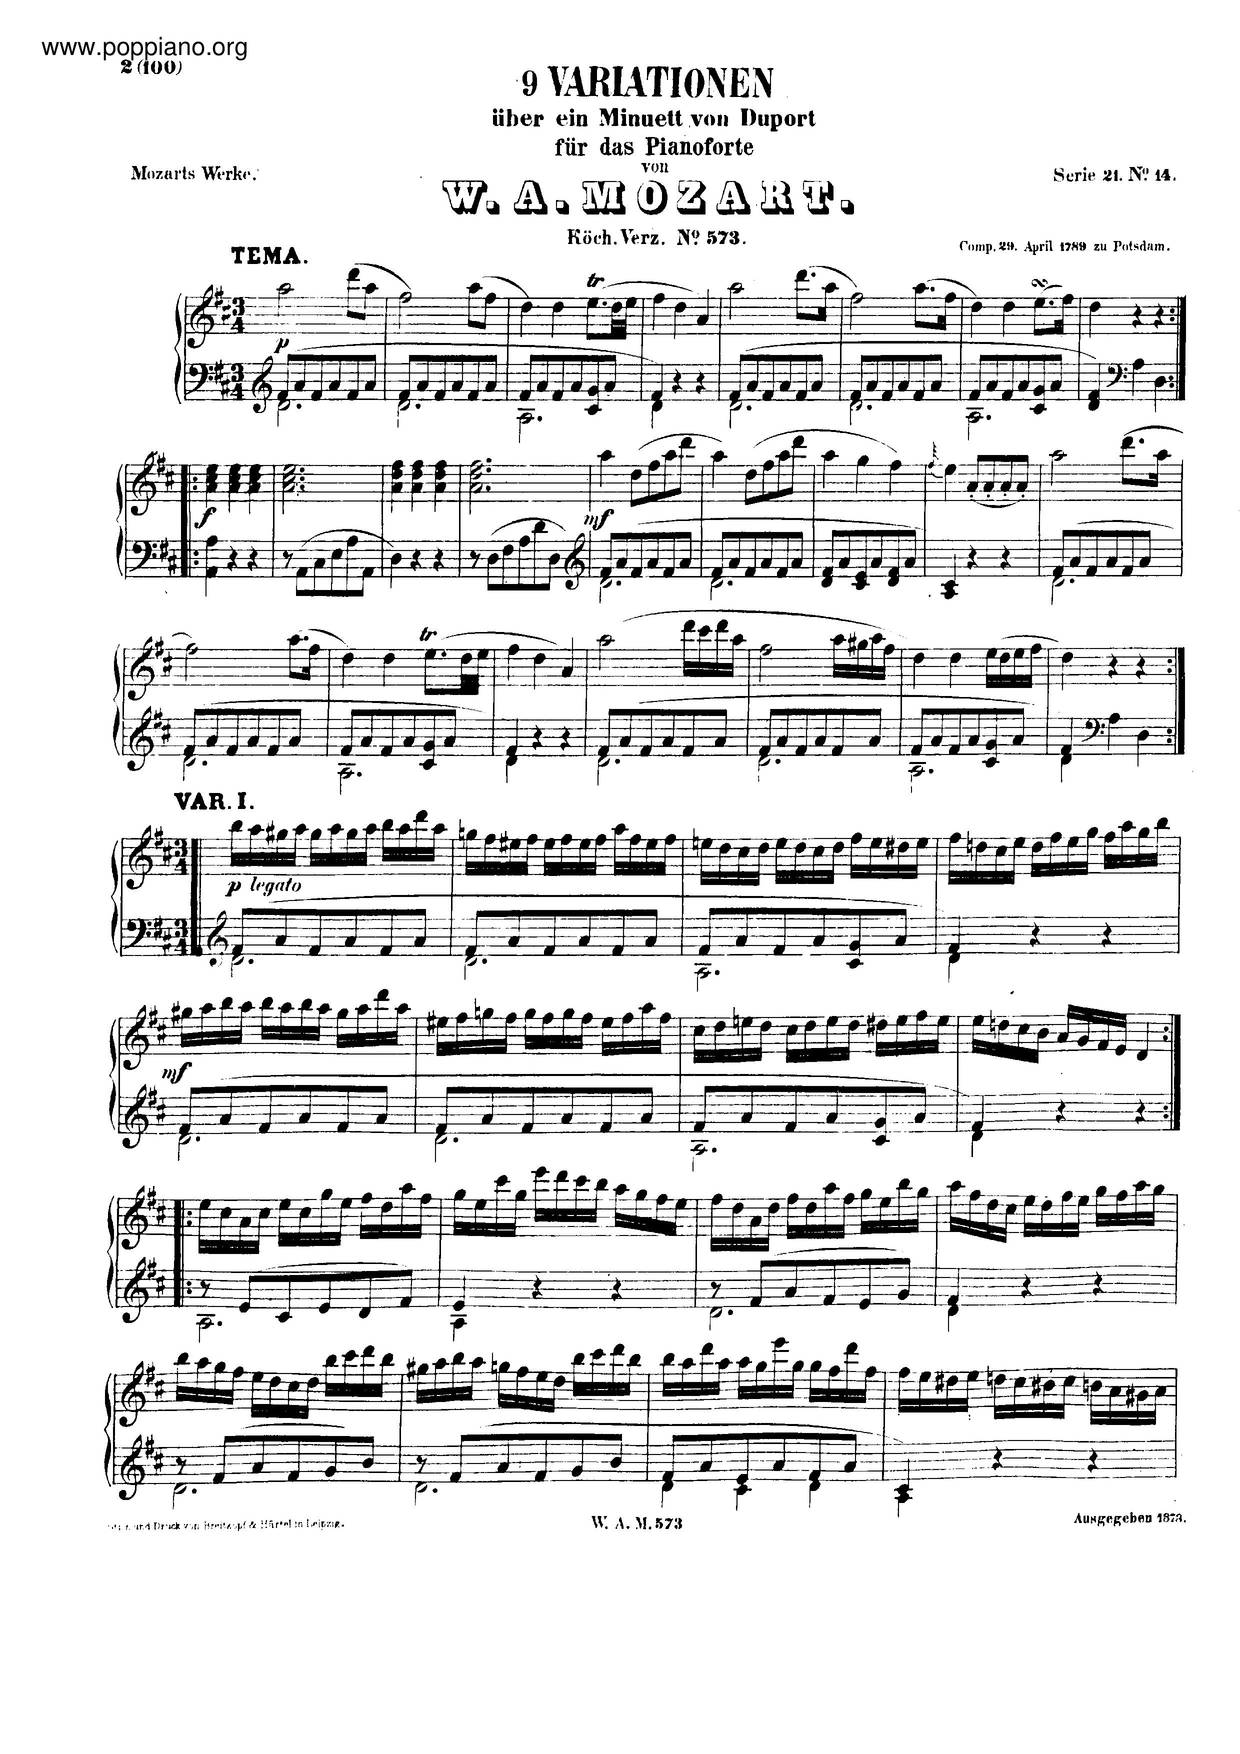 9 Variations On A Minuet By Duport, K. 573ピアノ譜